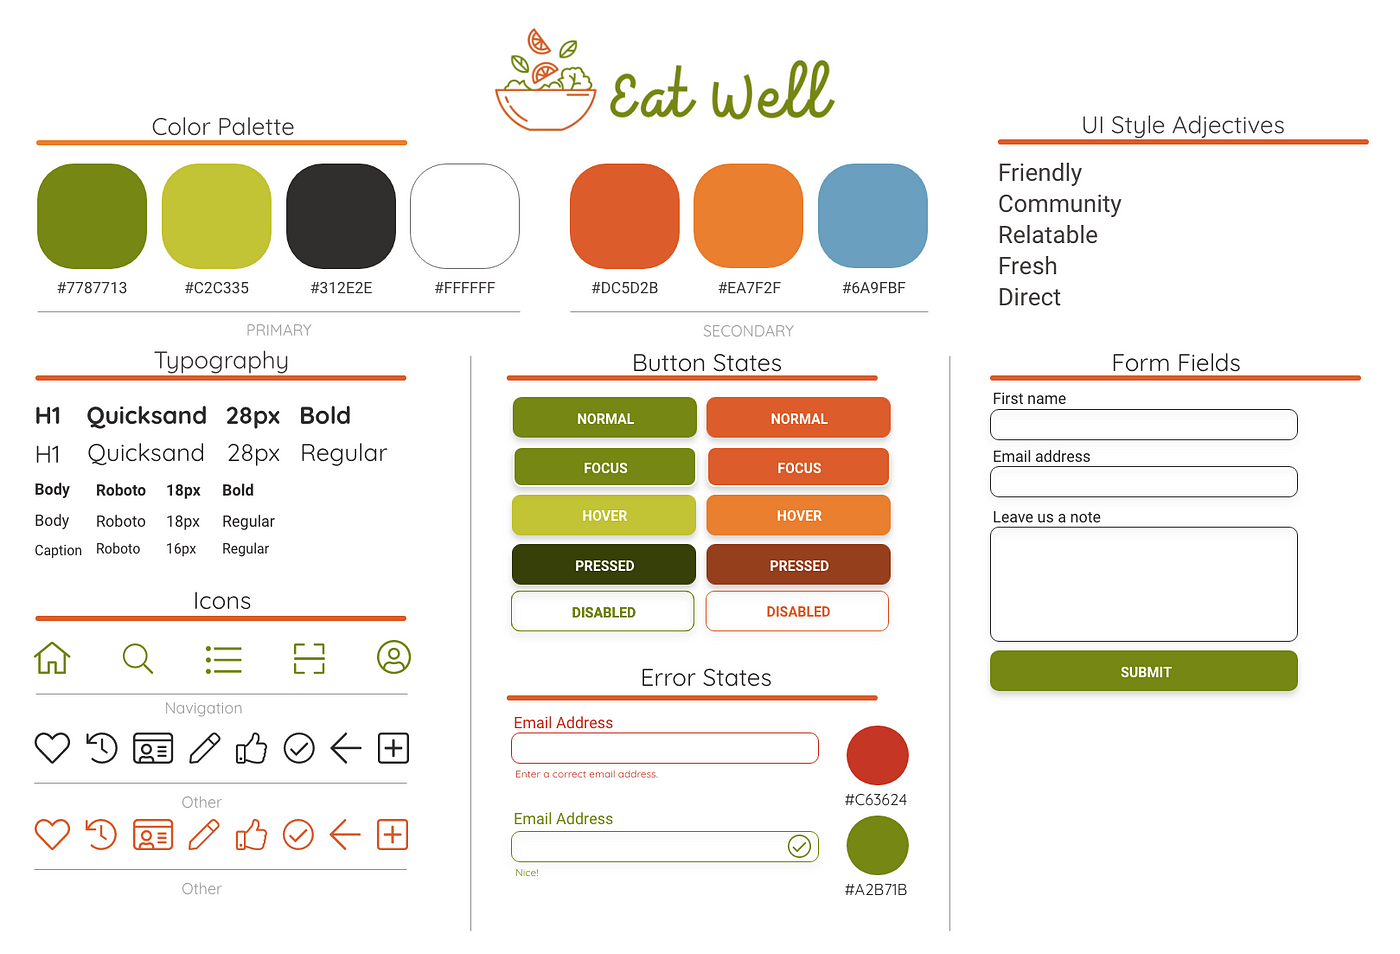 Style Guide — greens with orange accents, friendly fonts